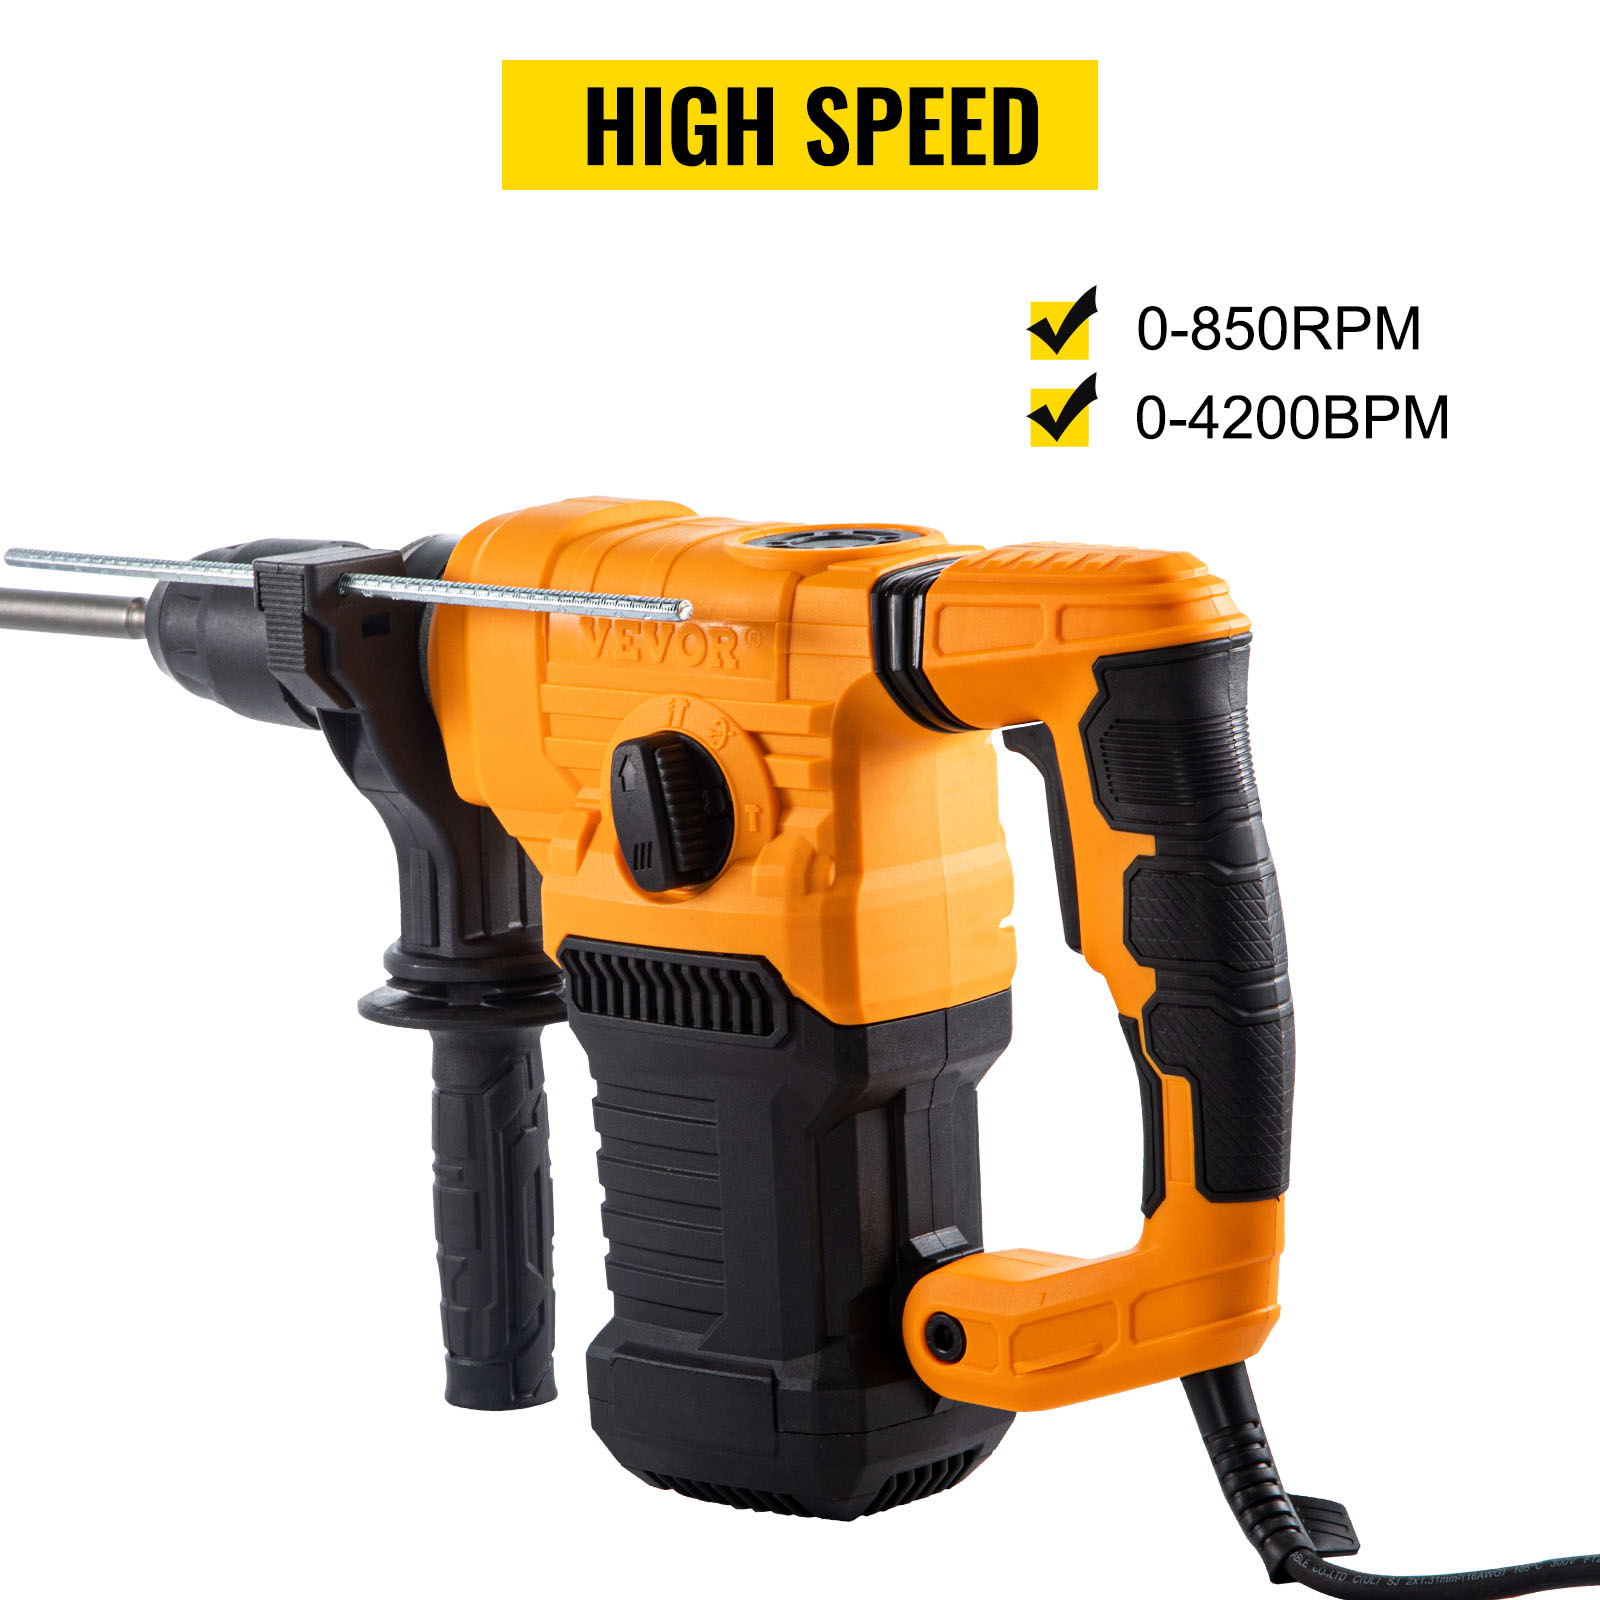 Rotary Hammer,4 in 1,850RPM